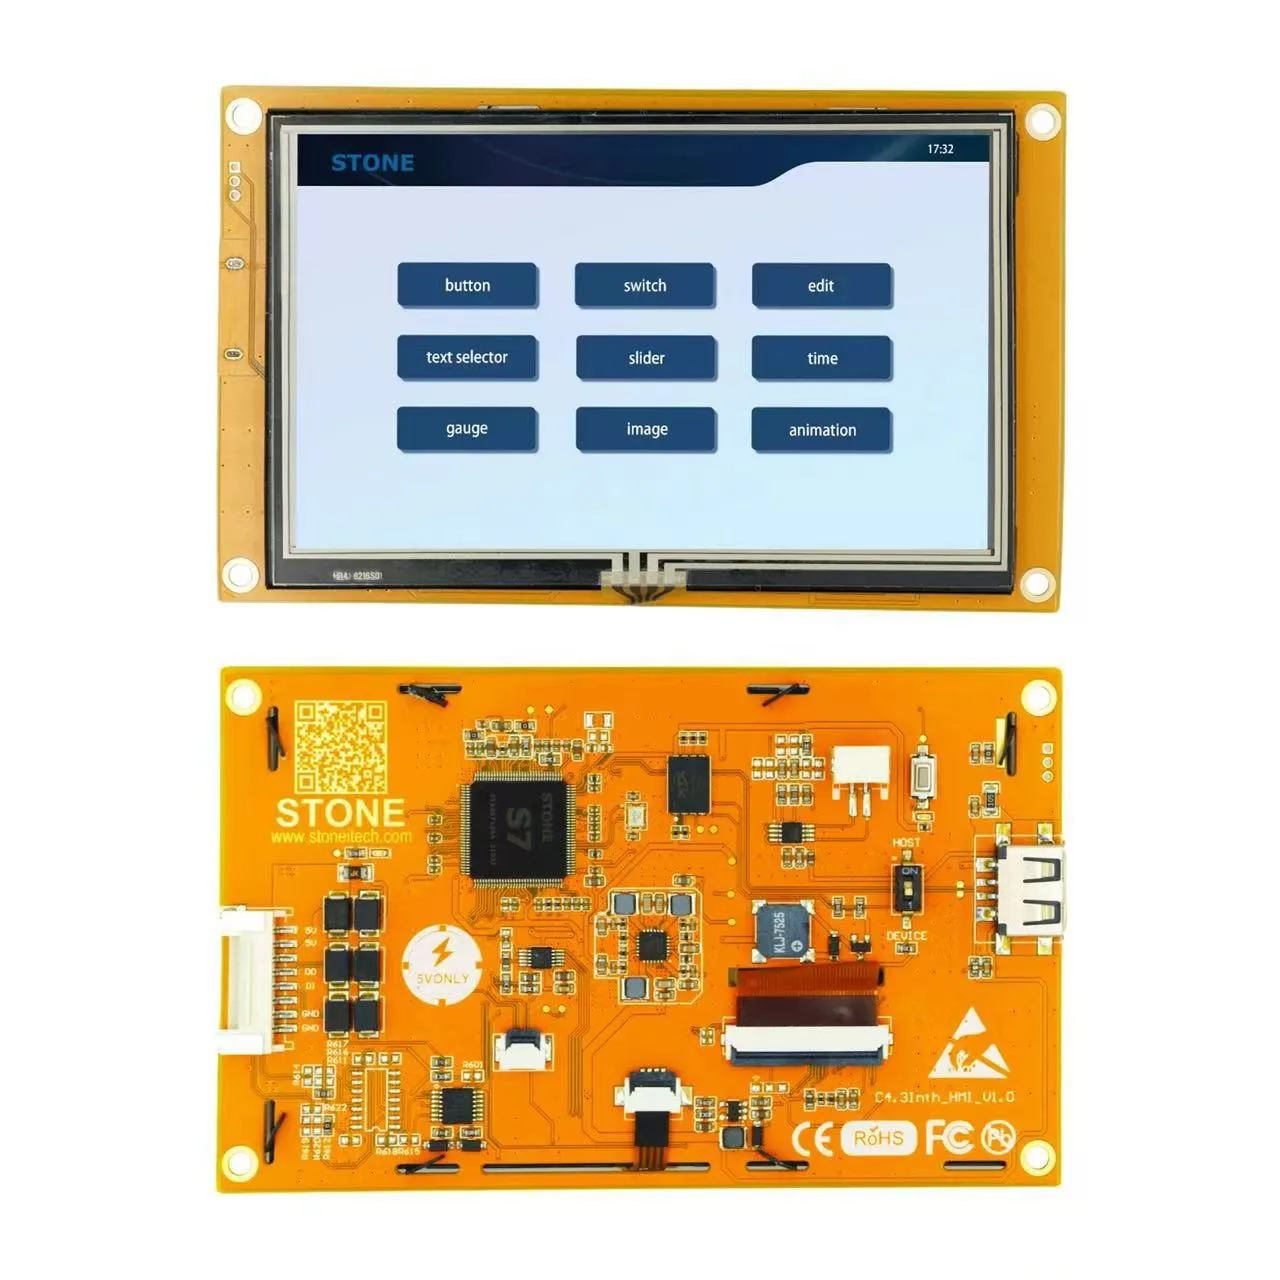 5 Inch HMI Graphic Touch Screen with Controller + Program + RS232/TTL Interface for Industrial Equipment